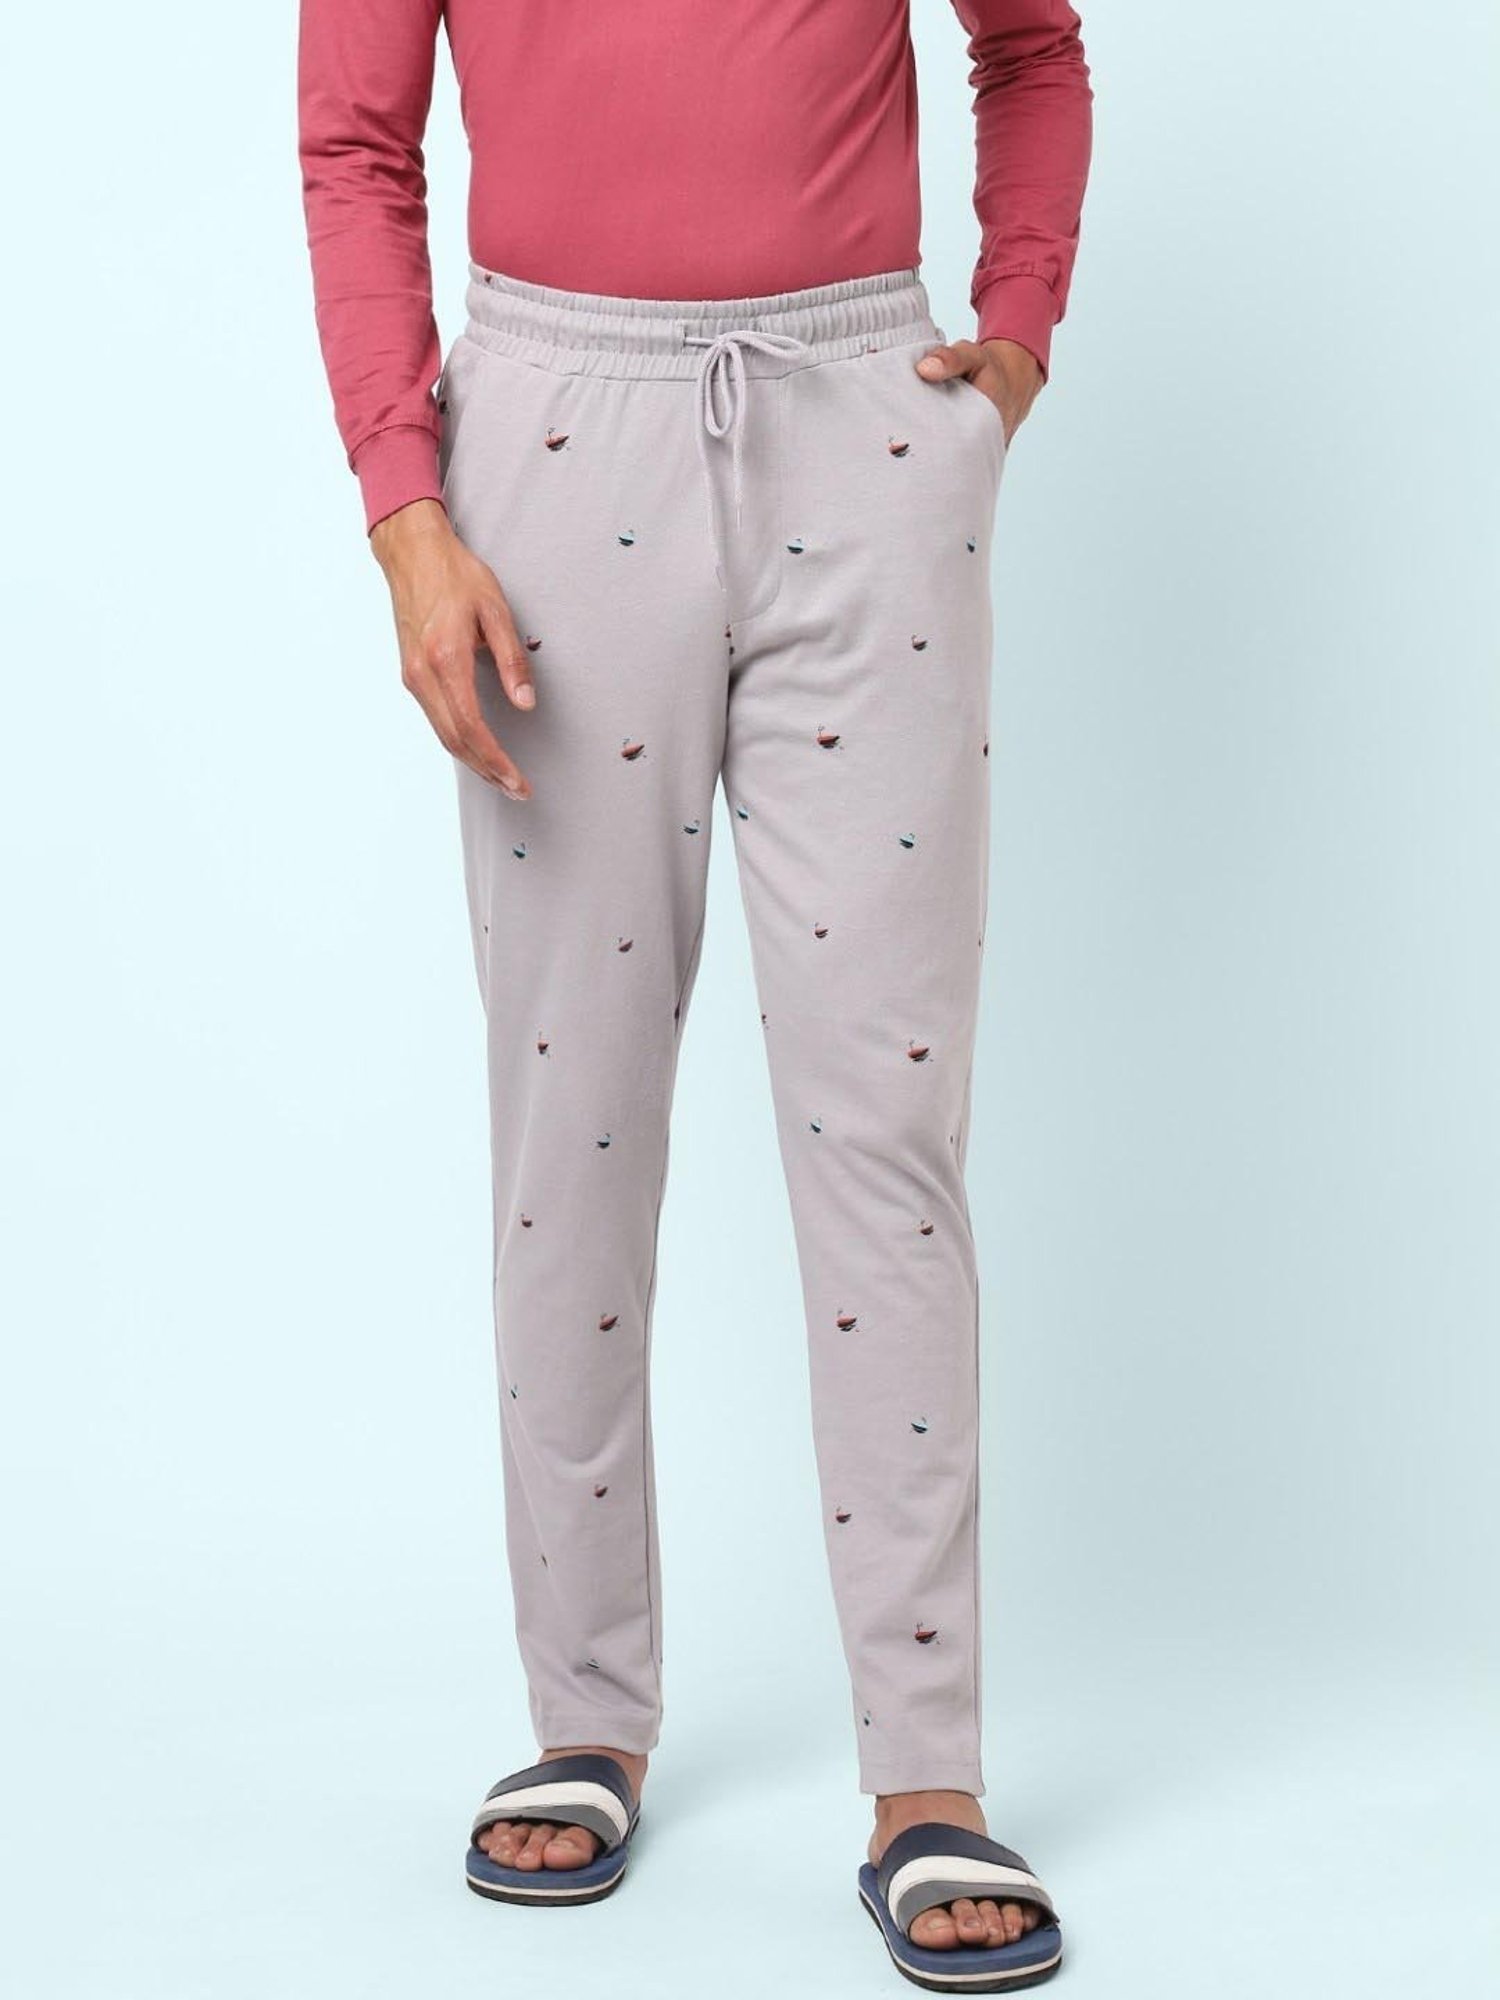 Hanro Night and Day Knit Slim Fit Lounge Pants | Bloomingdale's